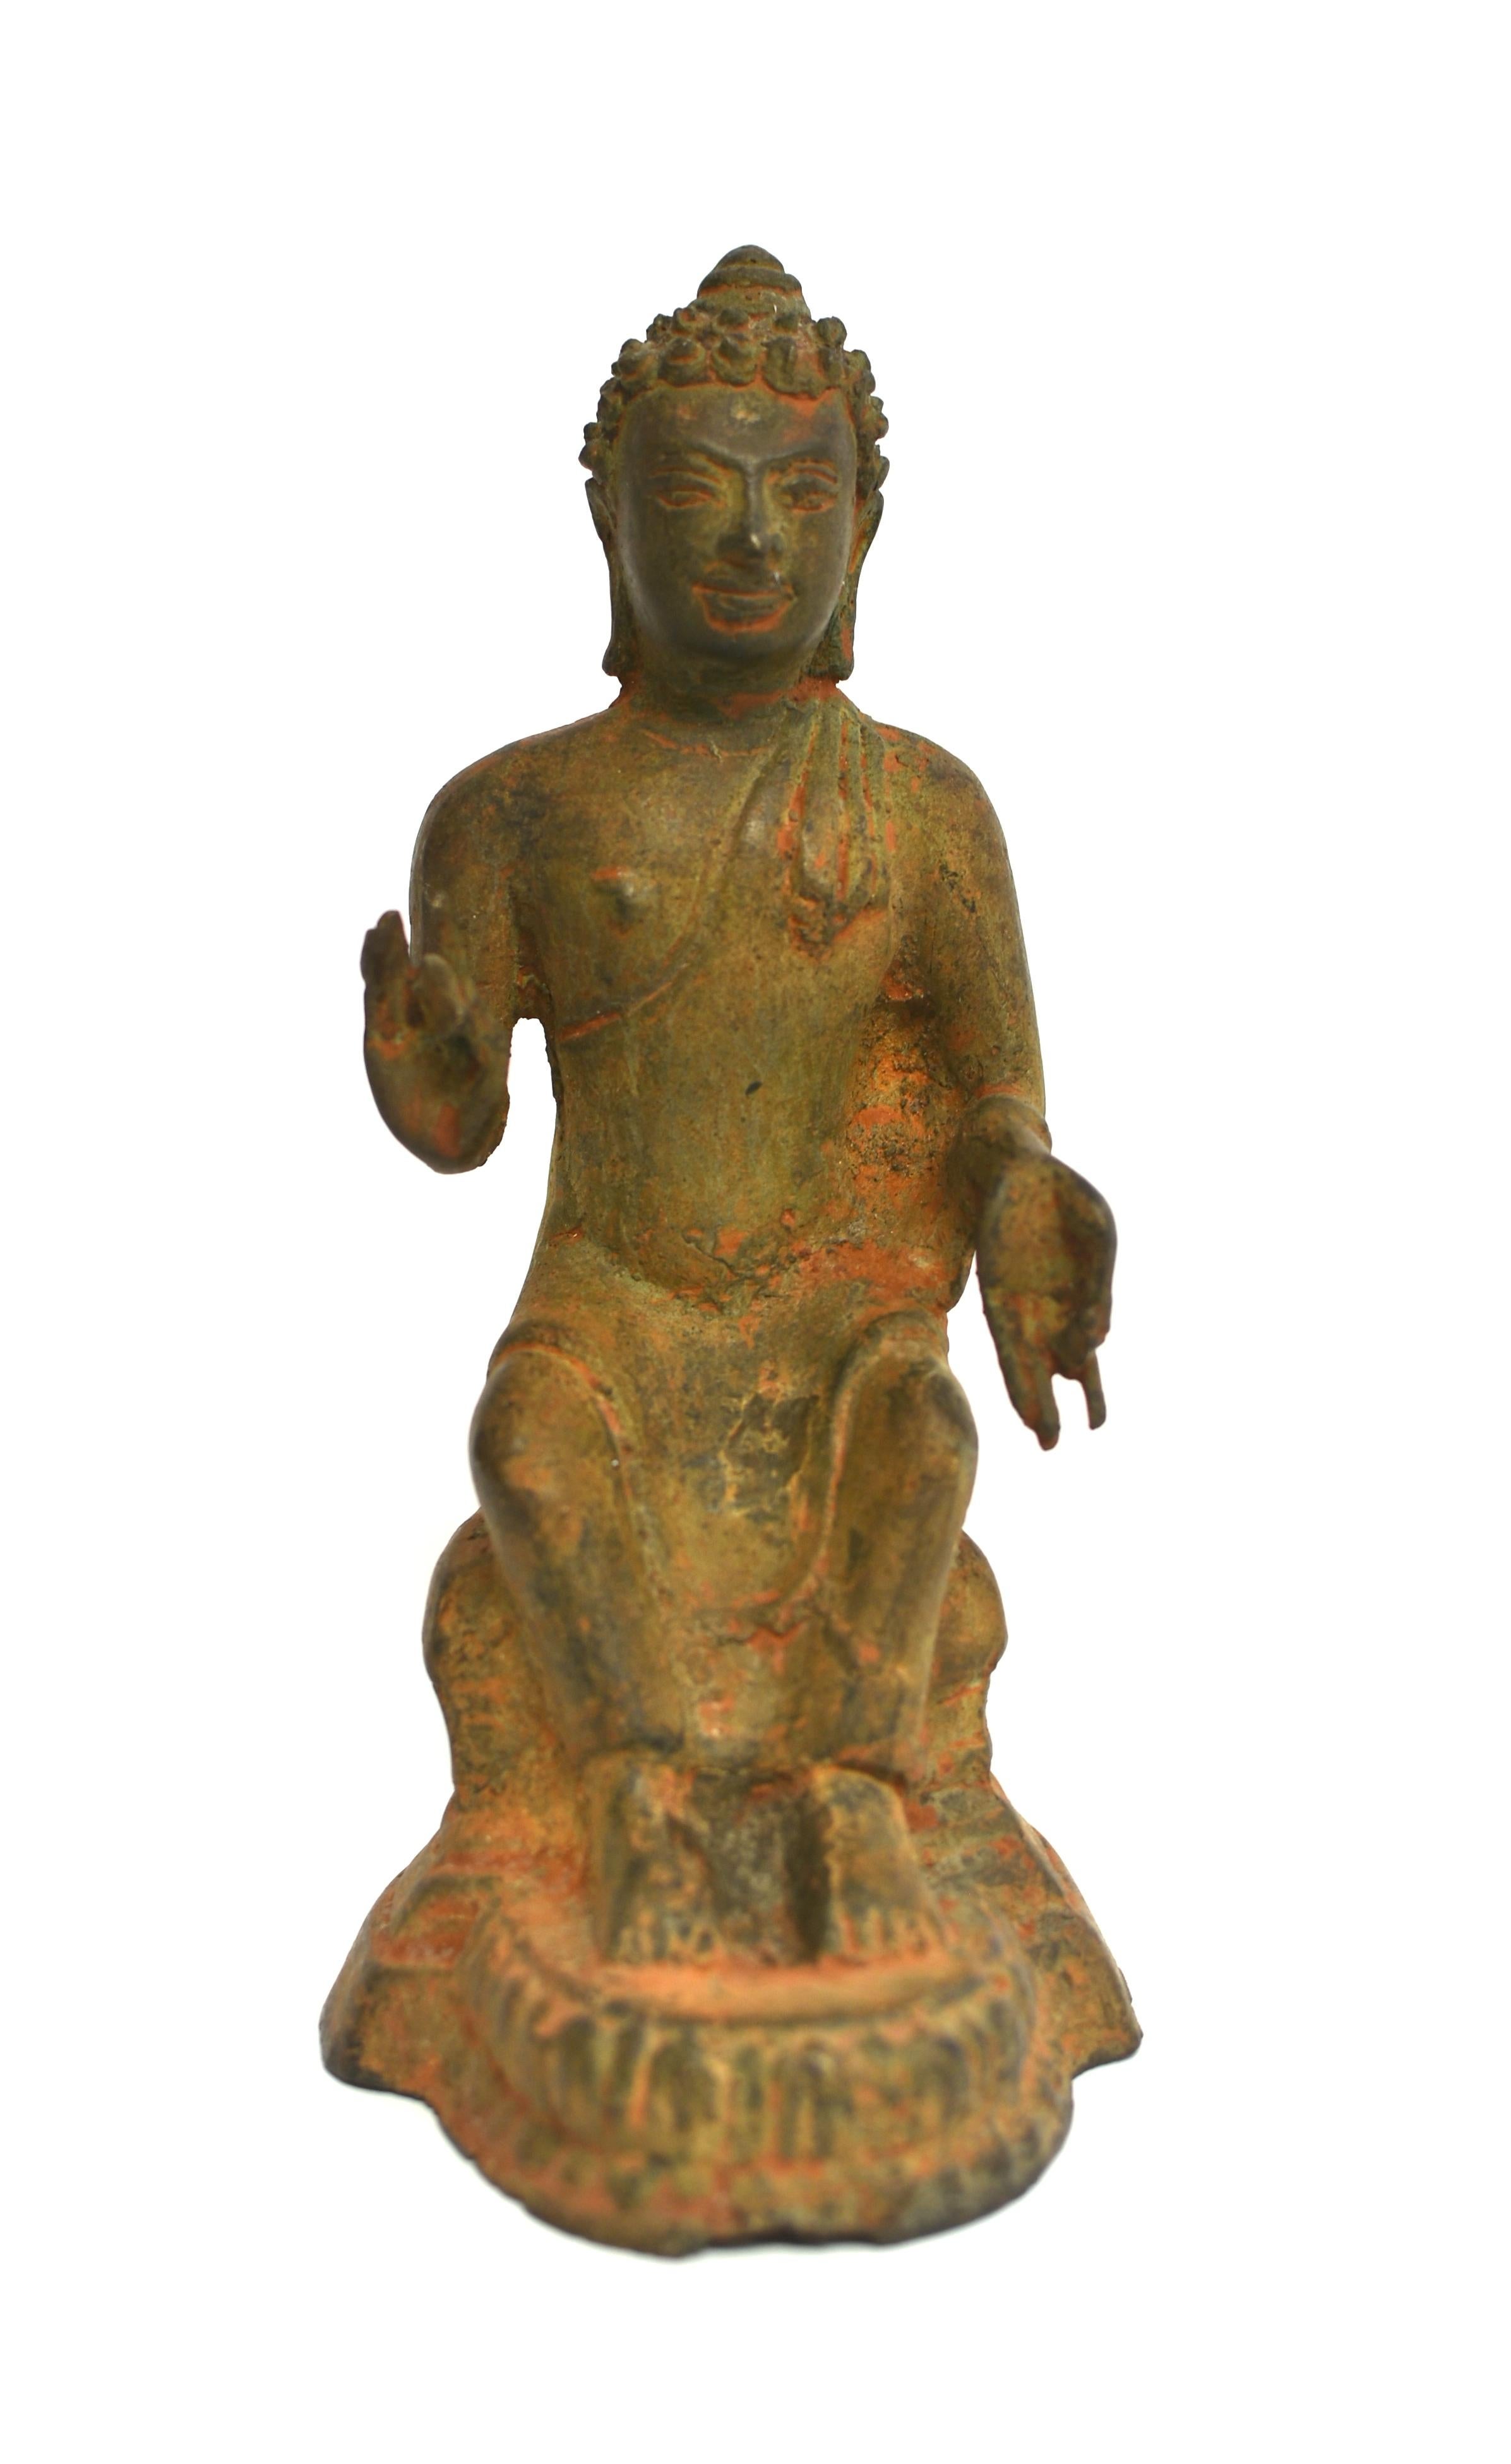 An antique Indian Buddha statue in all original condition. The face with straight sharp nose, full lips under large eyes. An urna between the brows symbolizing the third eye to decipher and conquer evil, under coiled hair gathered into a chignon.